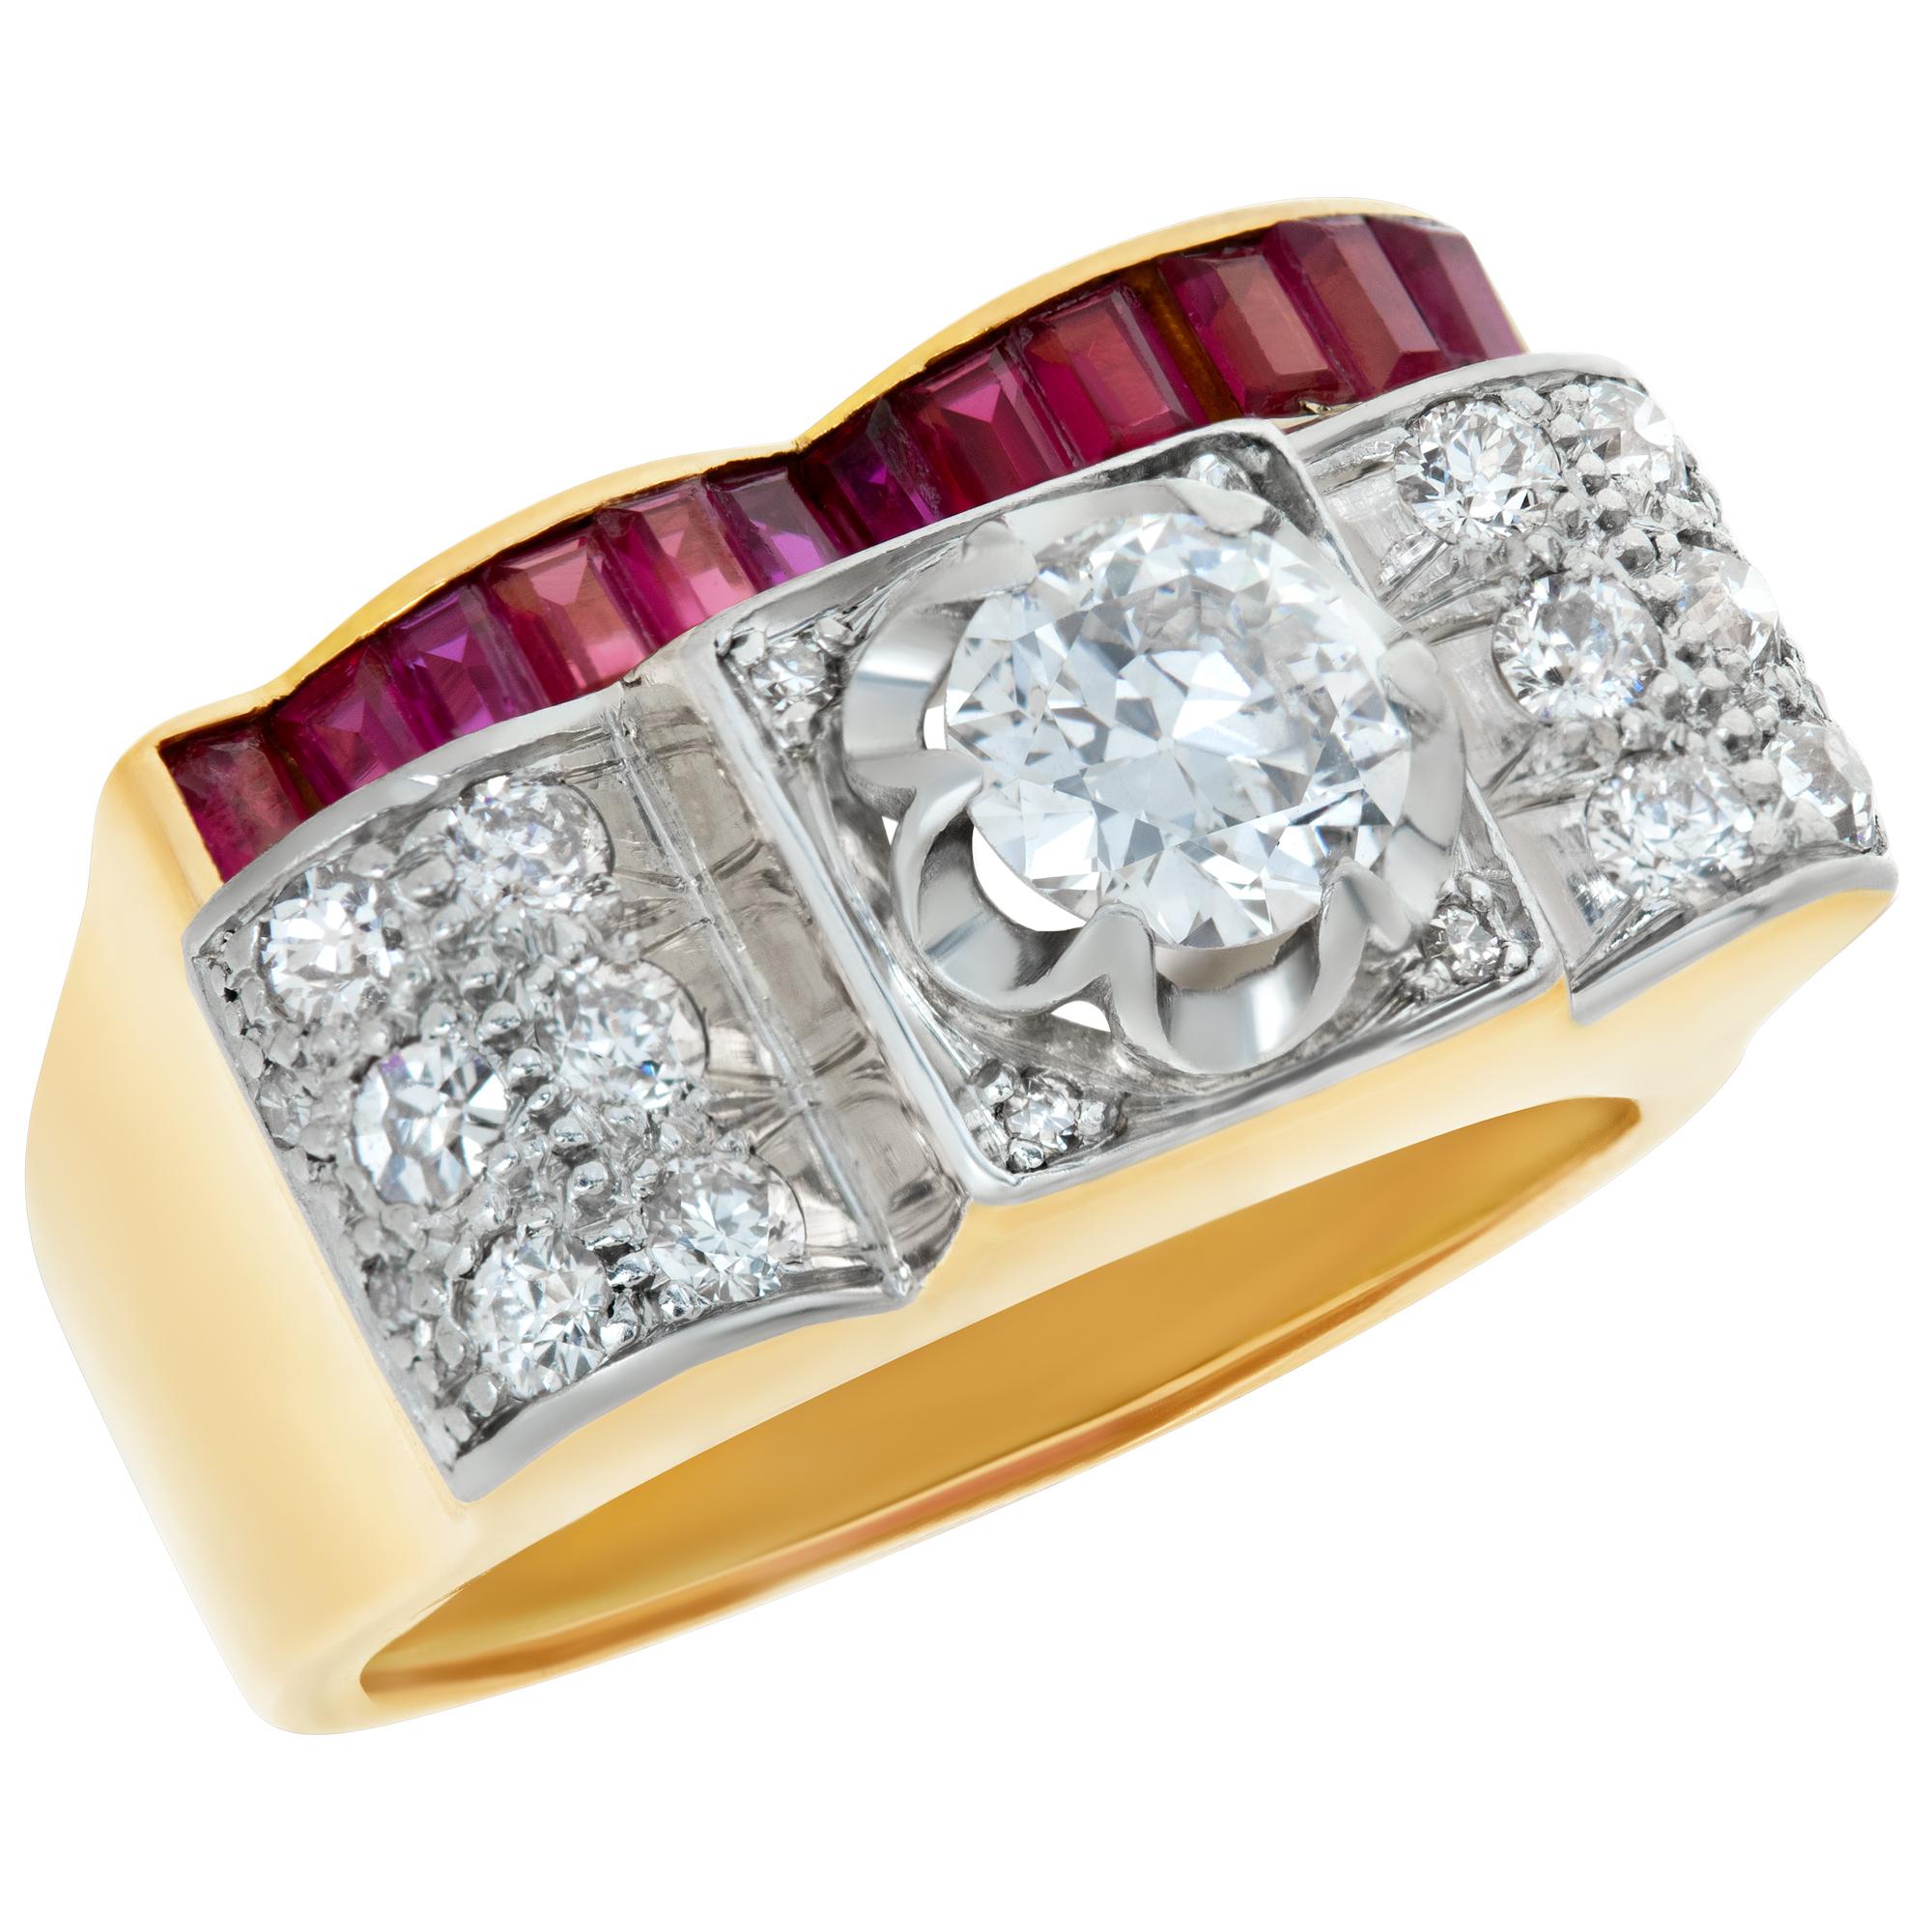 Mens 18k Yellow Gold Diamond Ring with Rubies In Excellent Condition For Sale In Surfside, FL